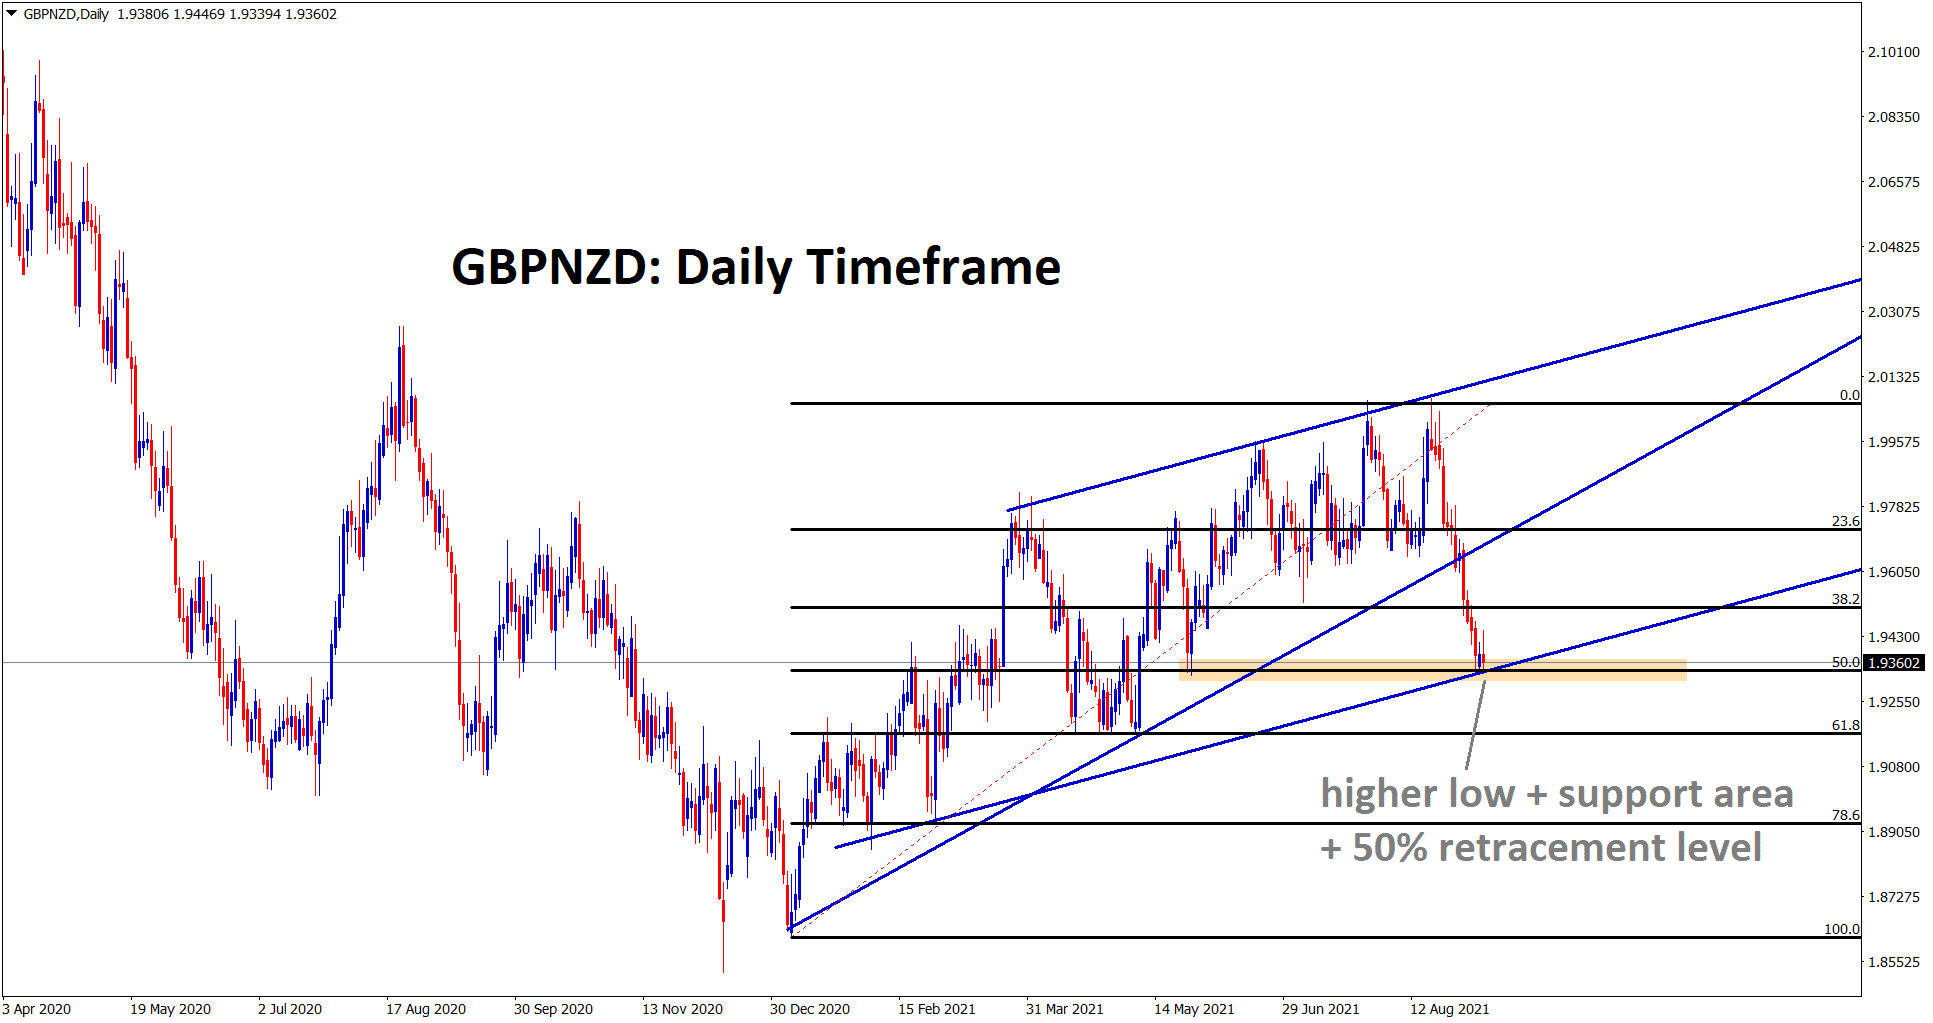 GBPNZD is rebounding from the higher low of ascending channel horizontal support and from 50 retracement area